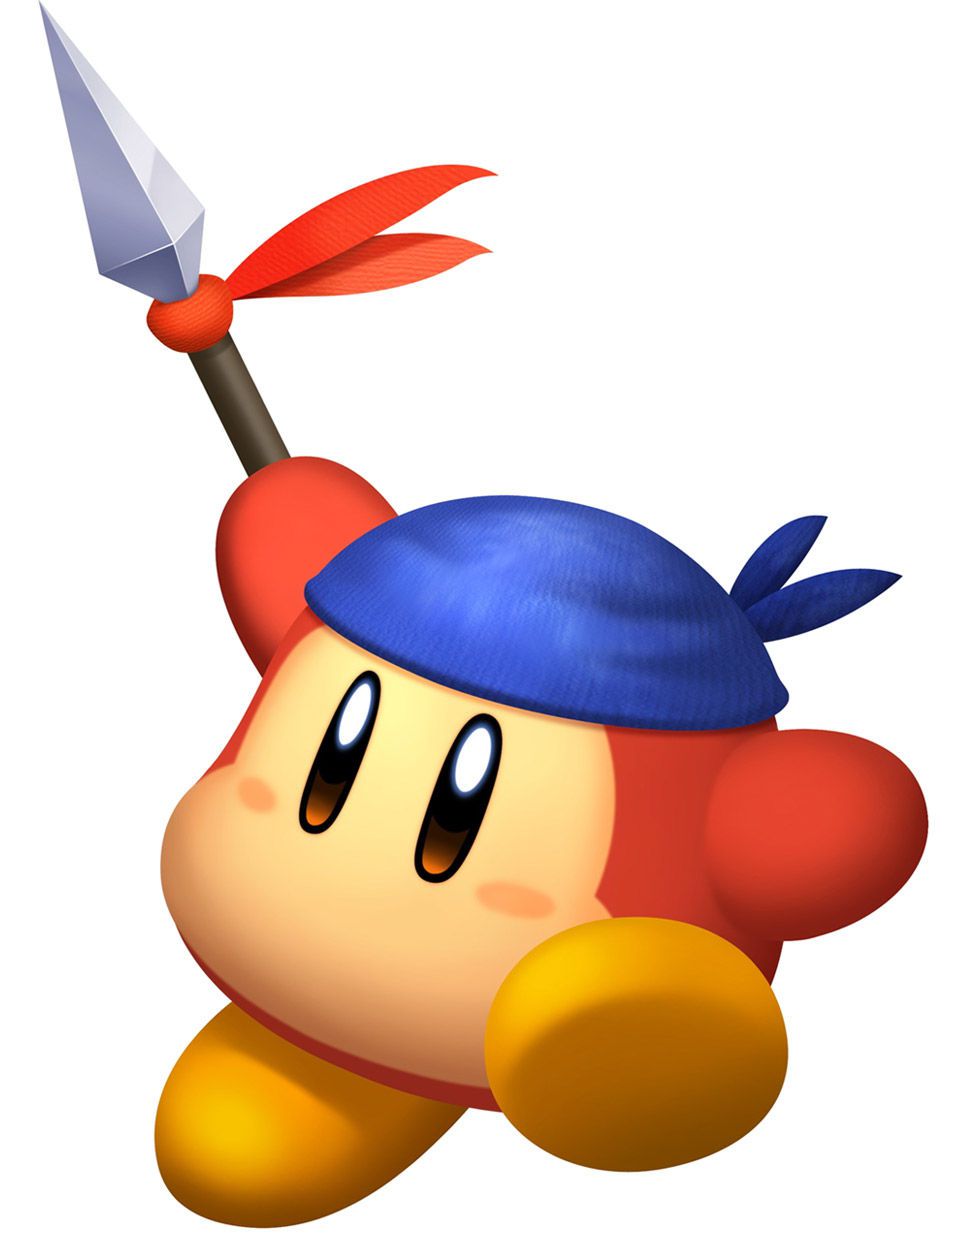 Kirby wii-star images 40